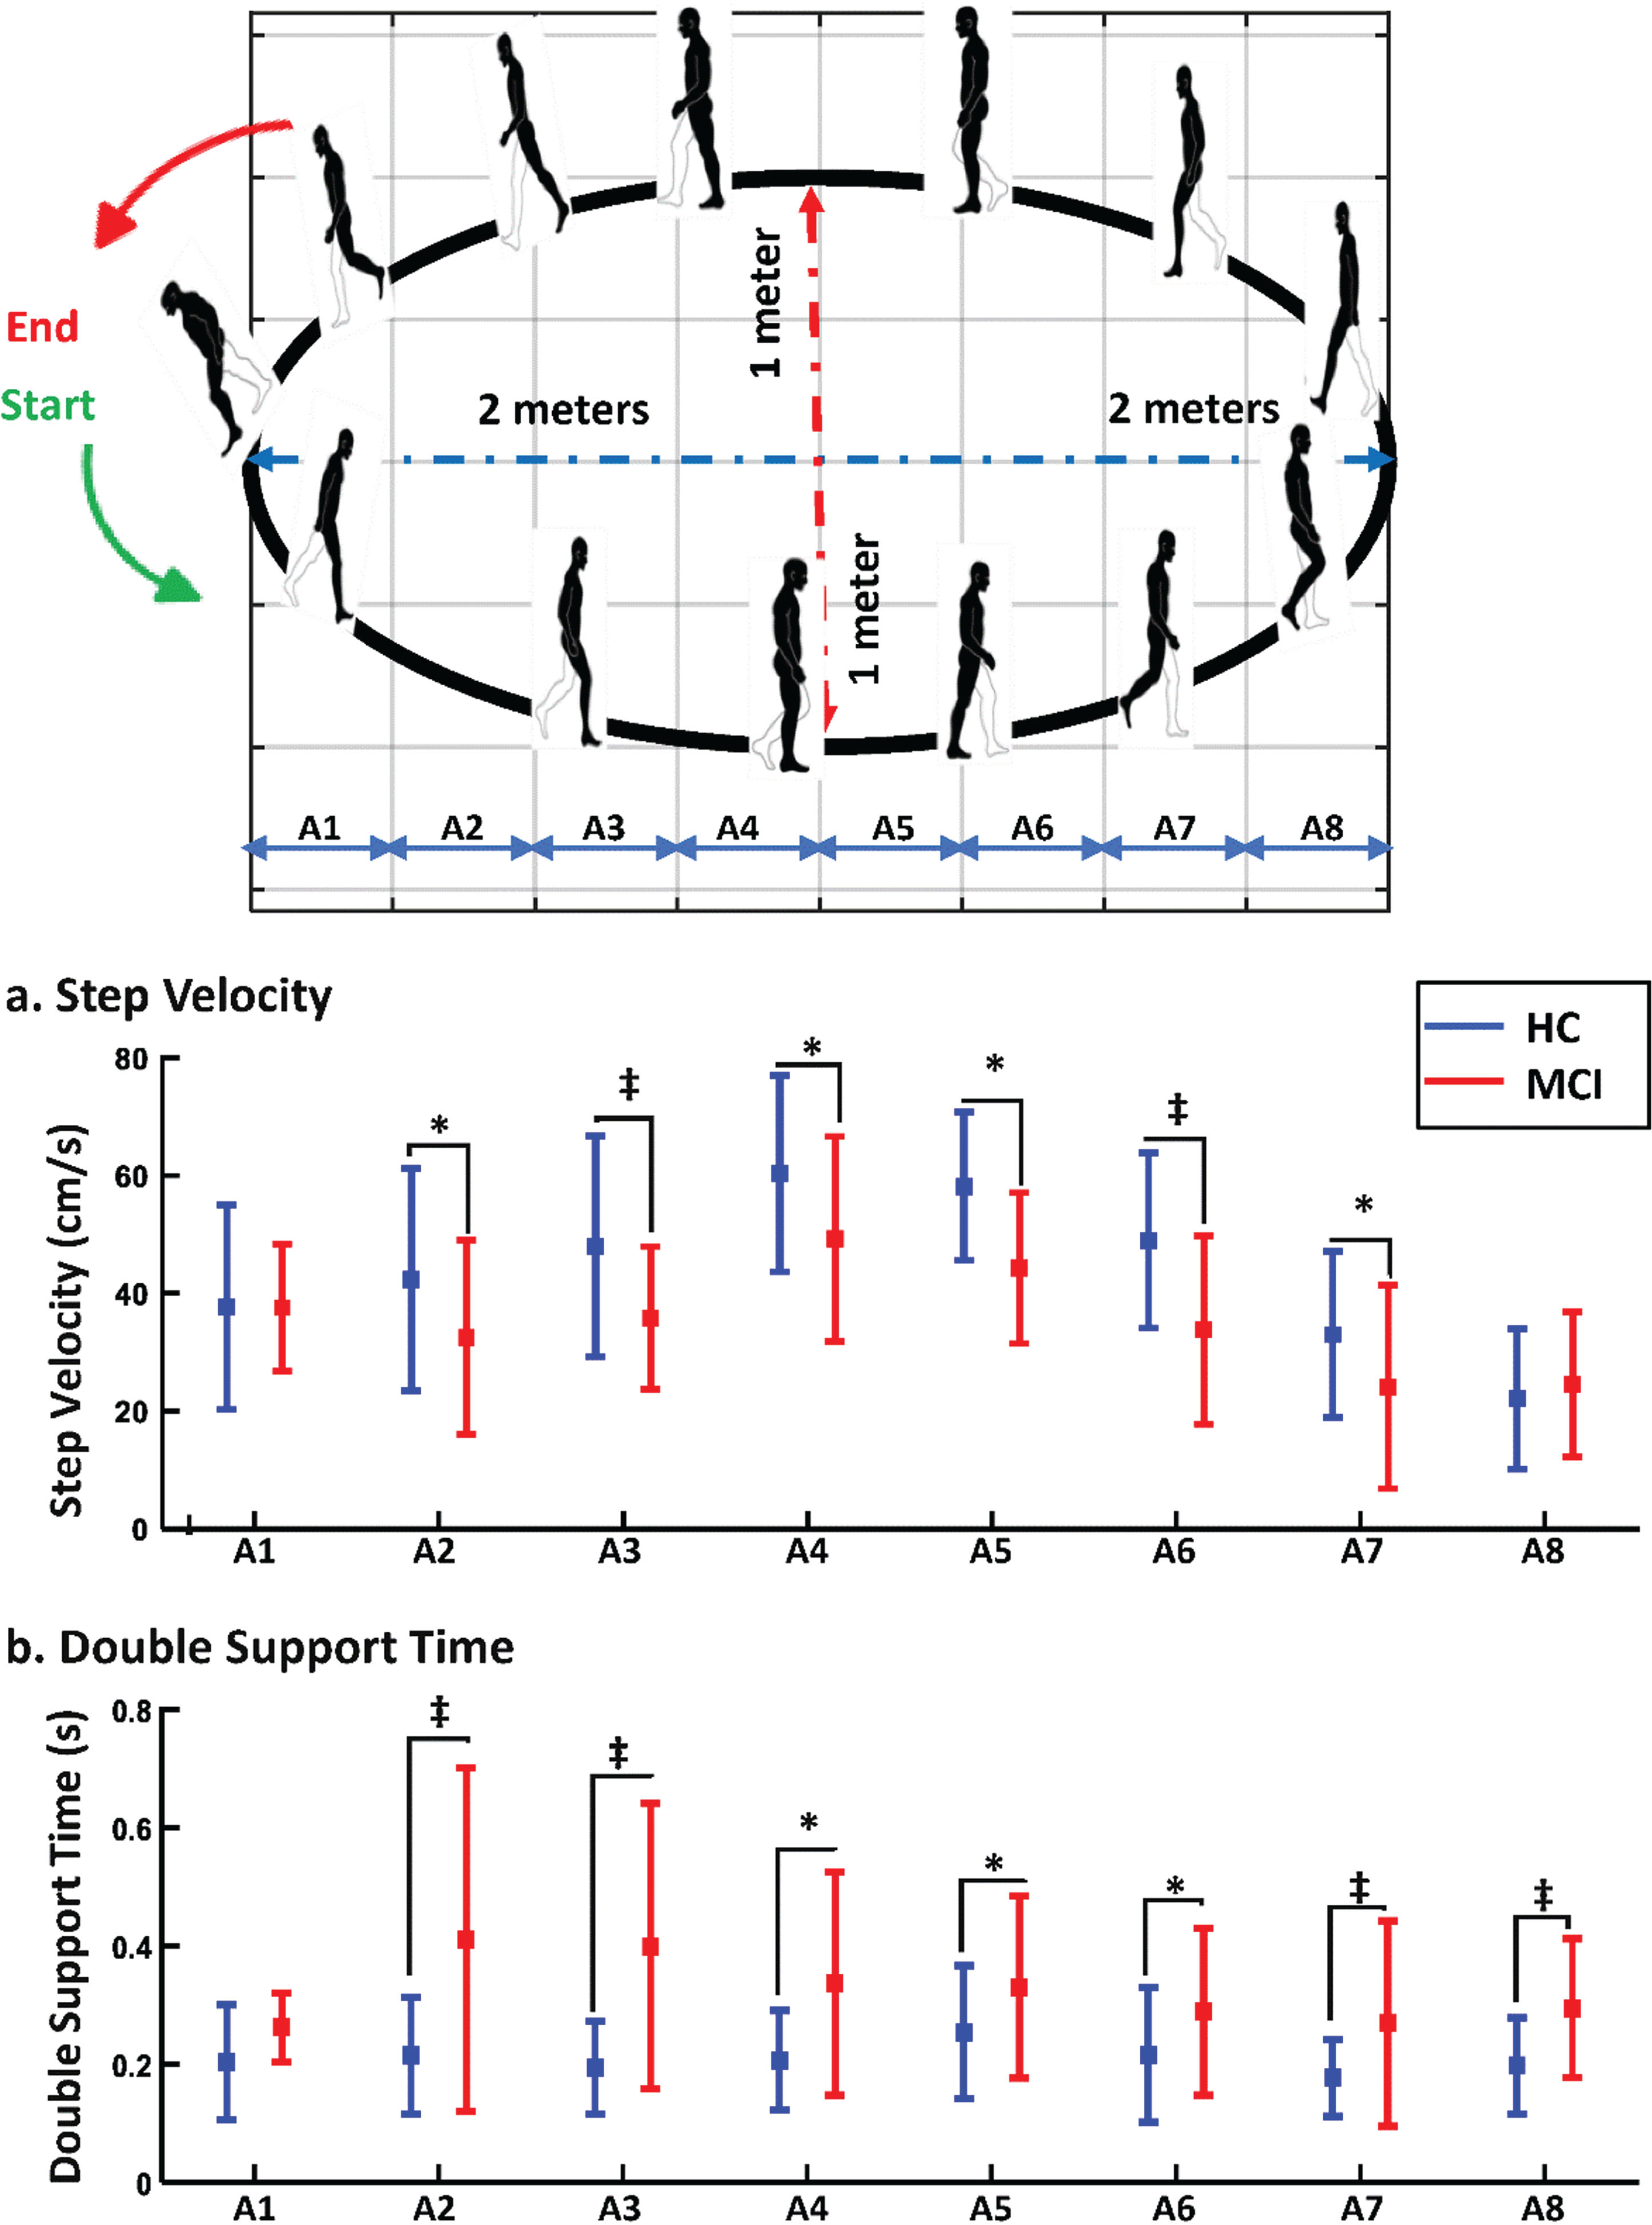 Comparison of gait markers between two study groups in various areas of curved path walking. This figure illustrates the comparative analysis of various gait markers between the two study groups across distinct sections of the curved path, labeled as sections A1 through A8. Each section represents a specific segment along the curved trajectory. *Shows the significant difference for p-value <0.05 and ‡shows the significant difference for p-value <0.005.